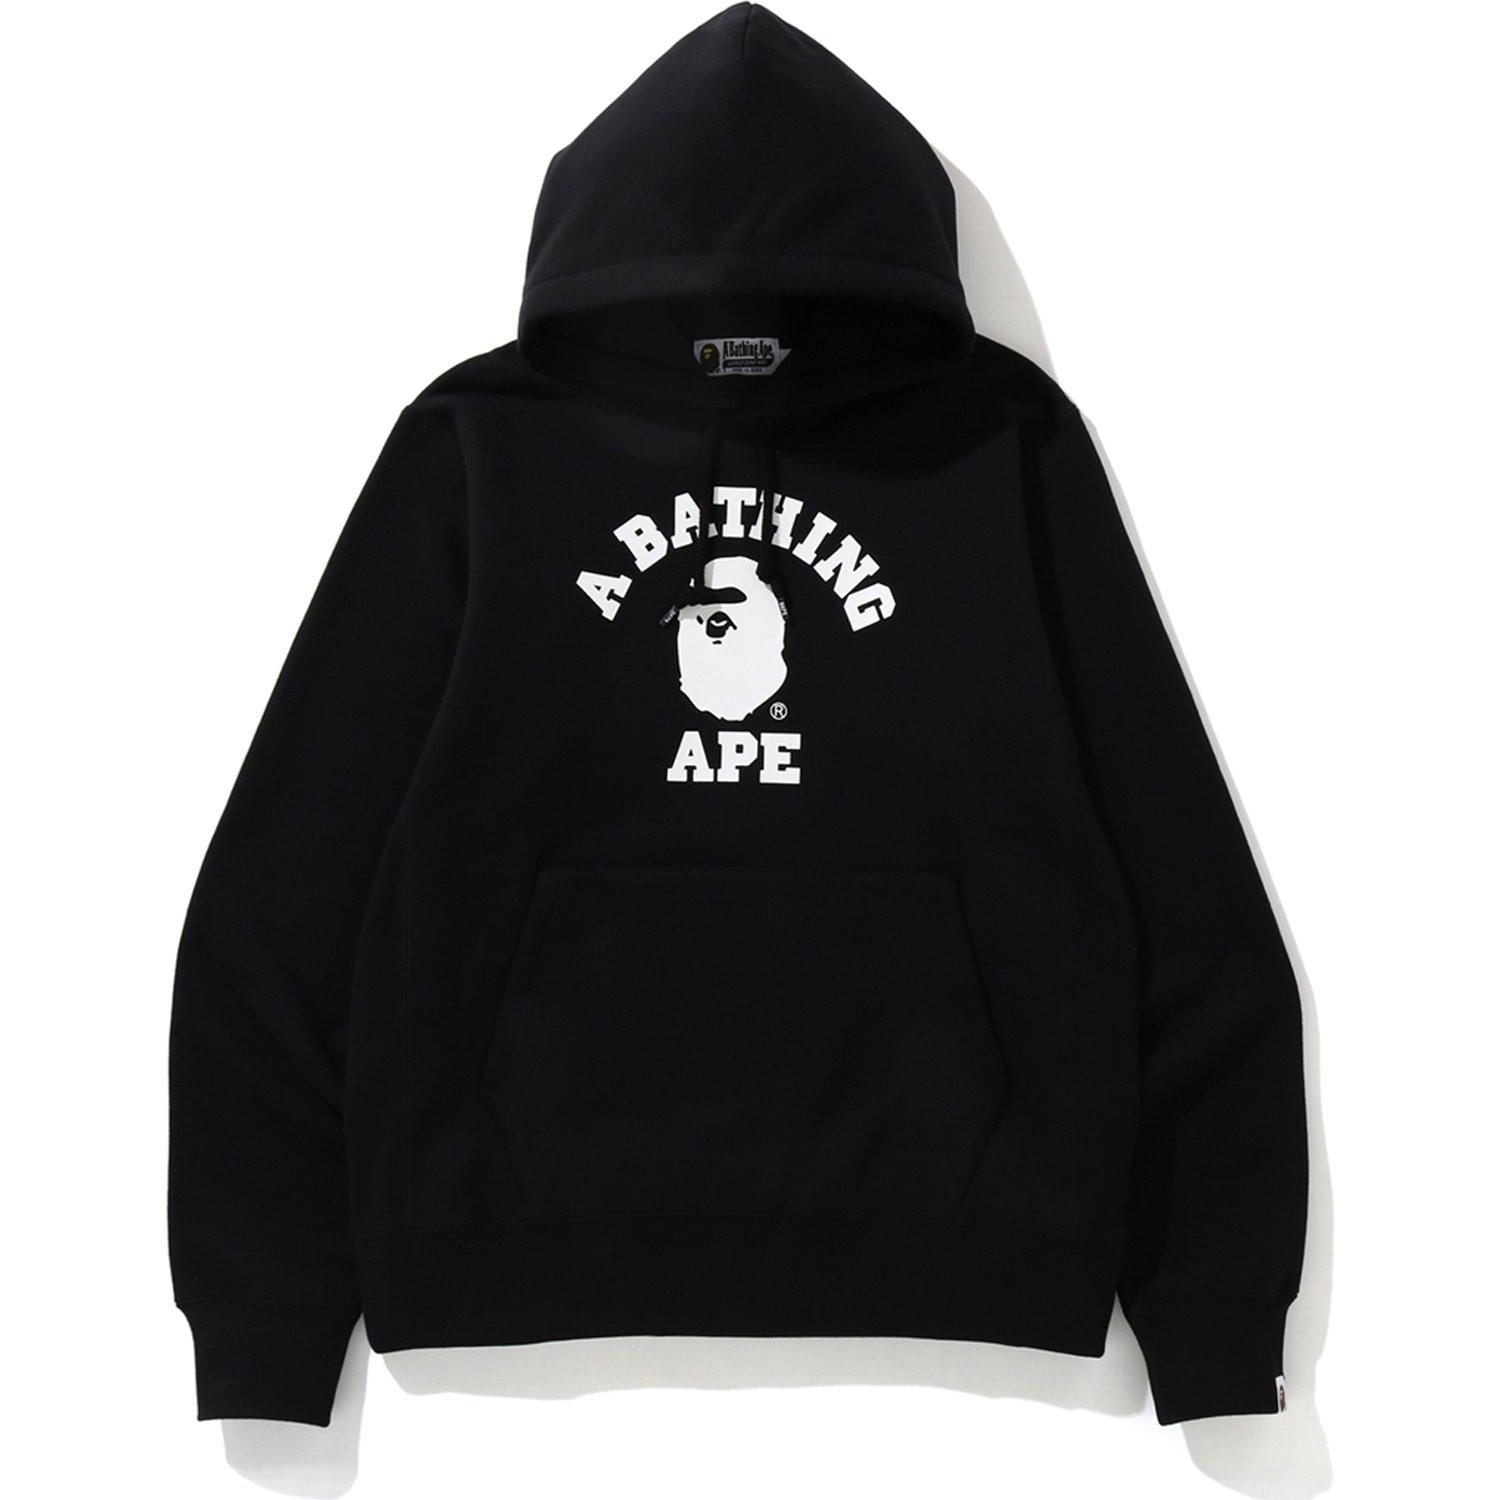 A Bathing Ape College Heavy Weight Pullover Hoodie in Black/White (Black) for Men - Lyst